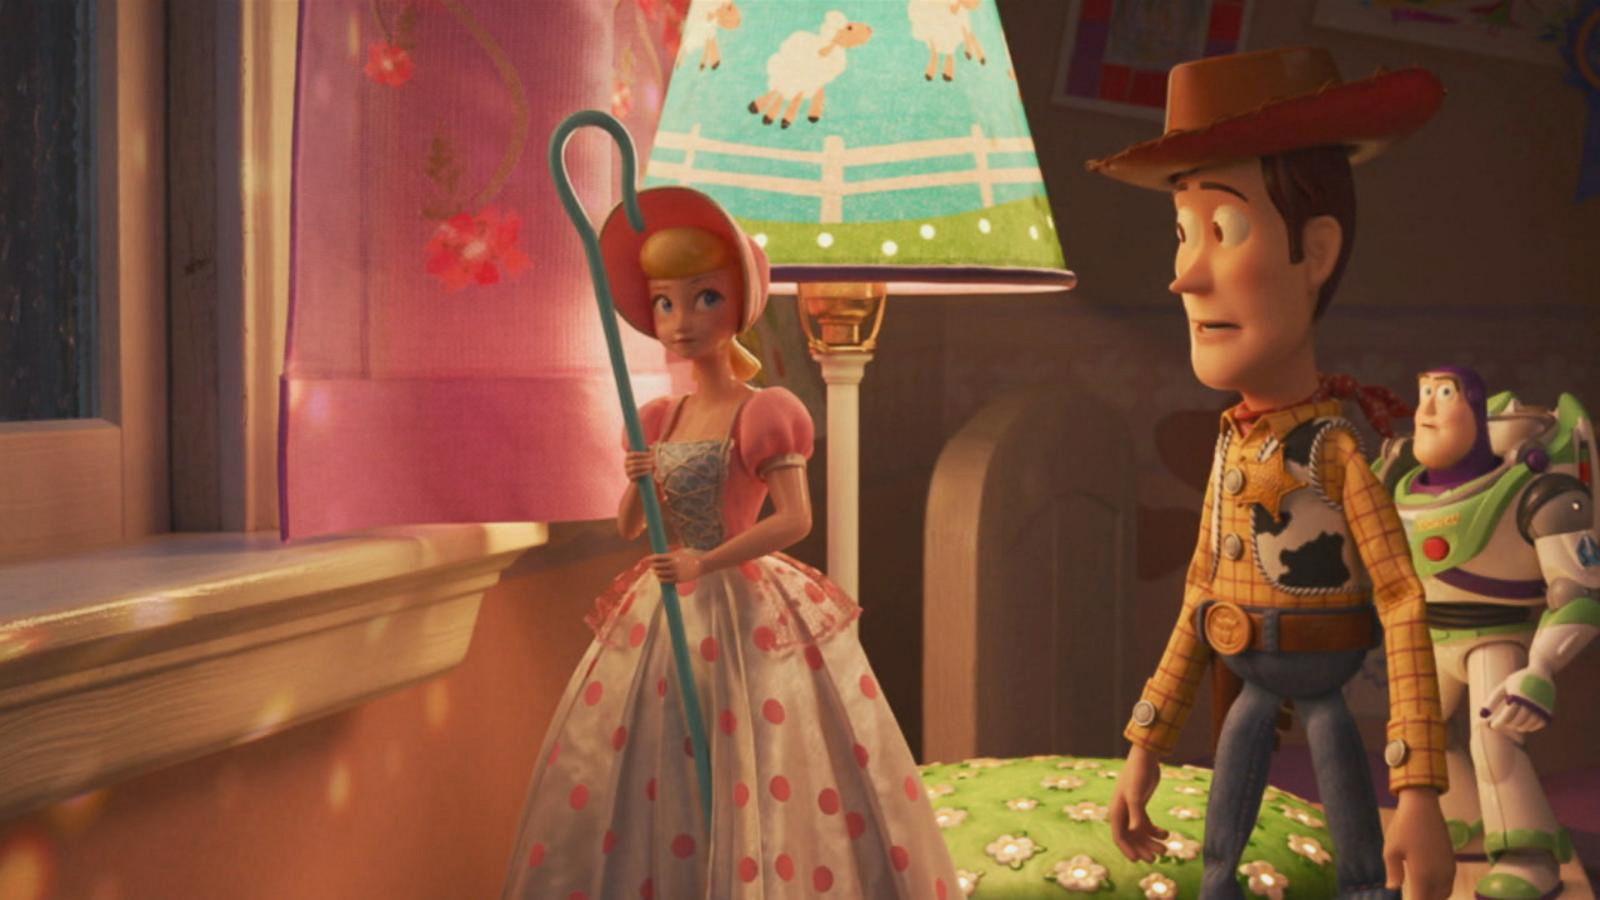 Exclusive look at 'Toy Story 4' shows Bo Peep is back